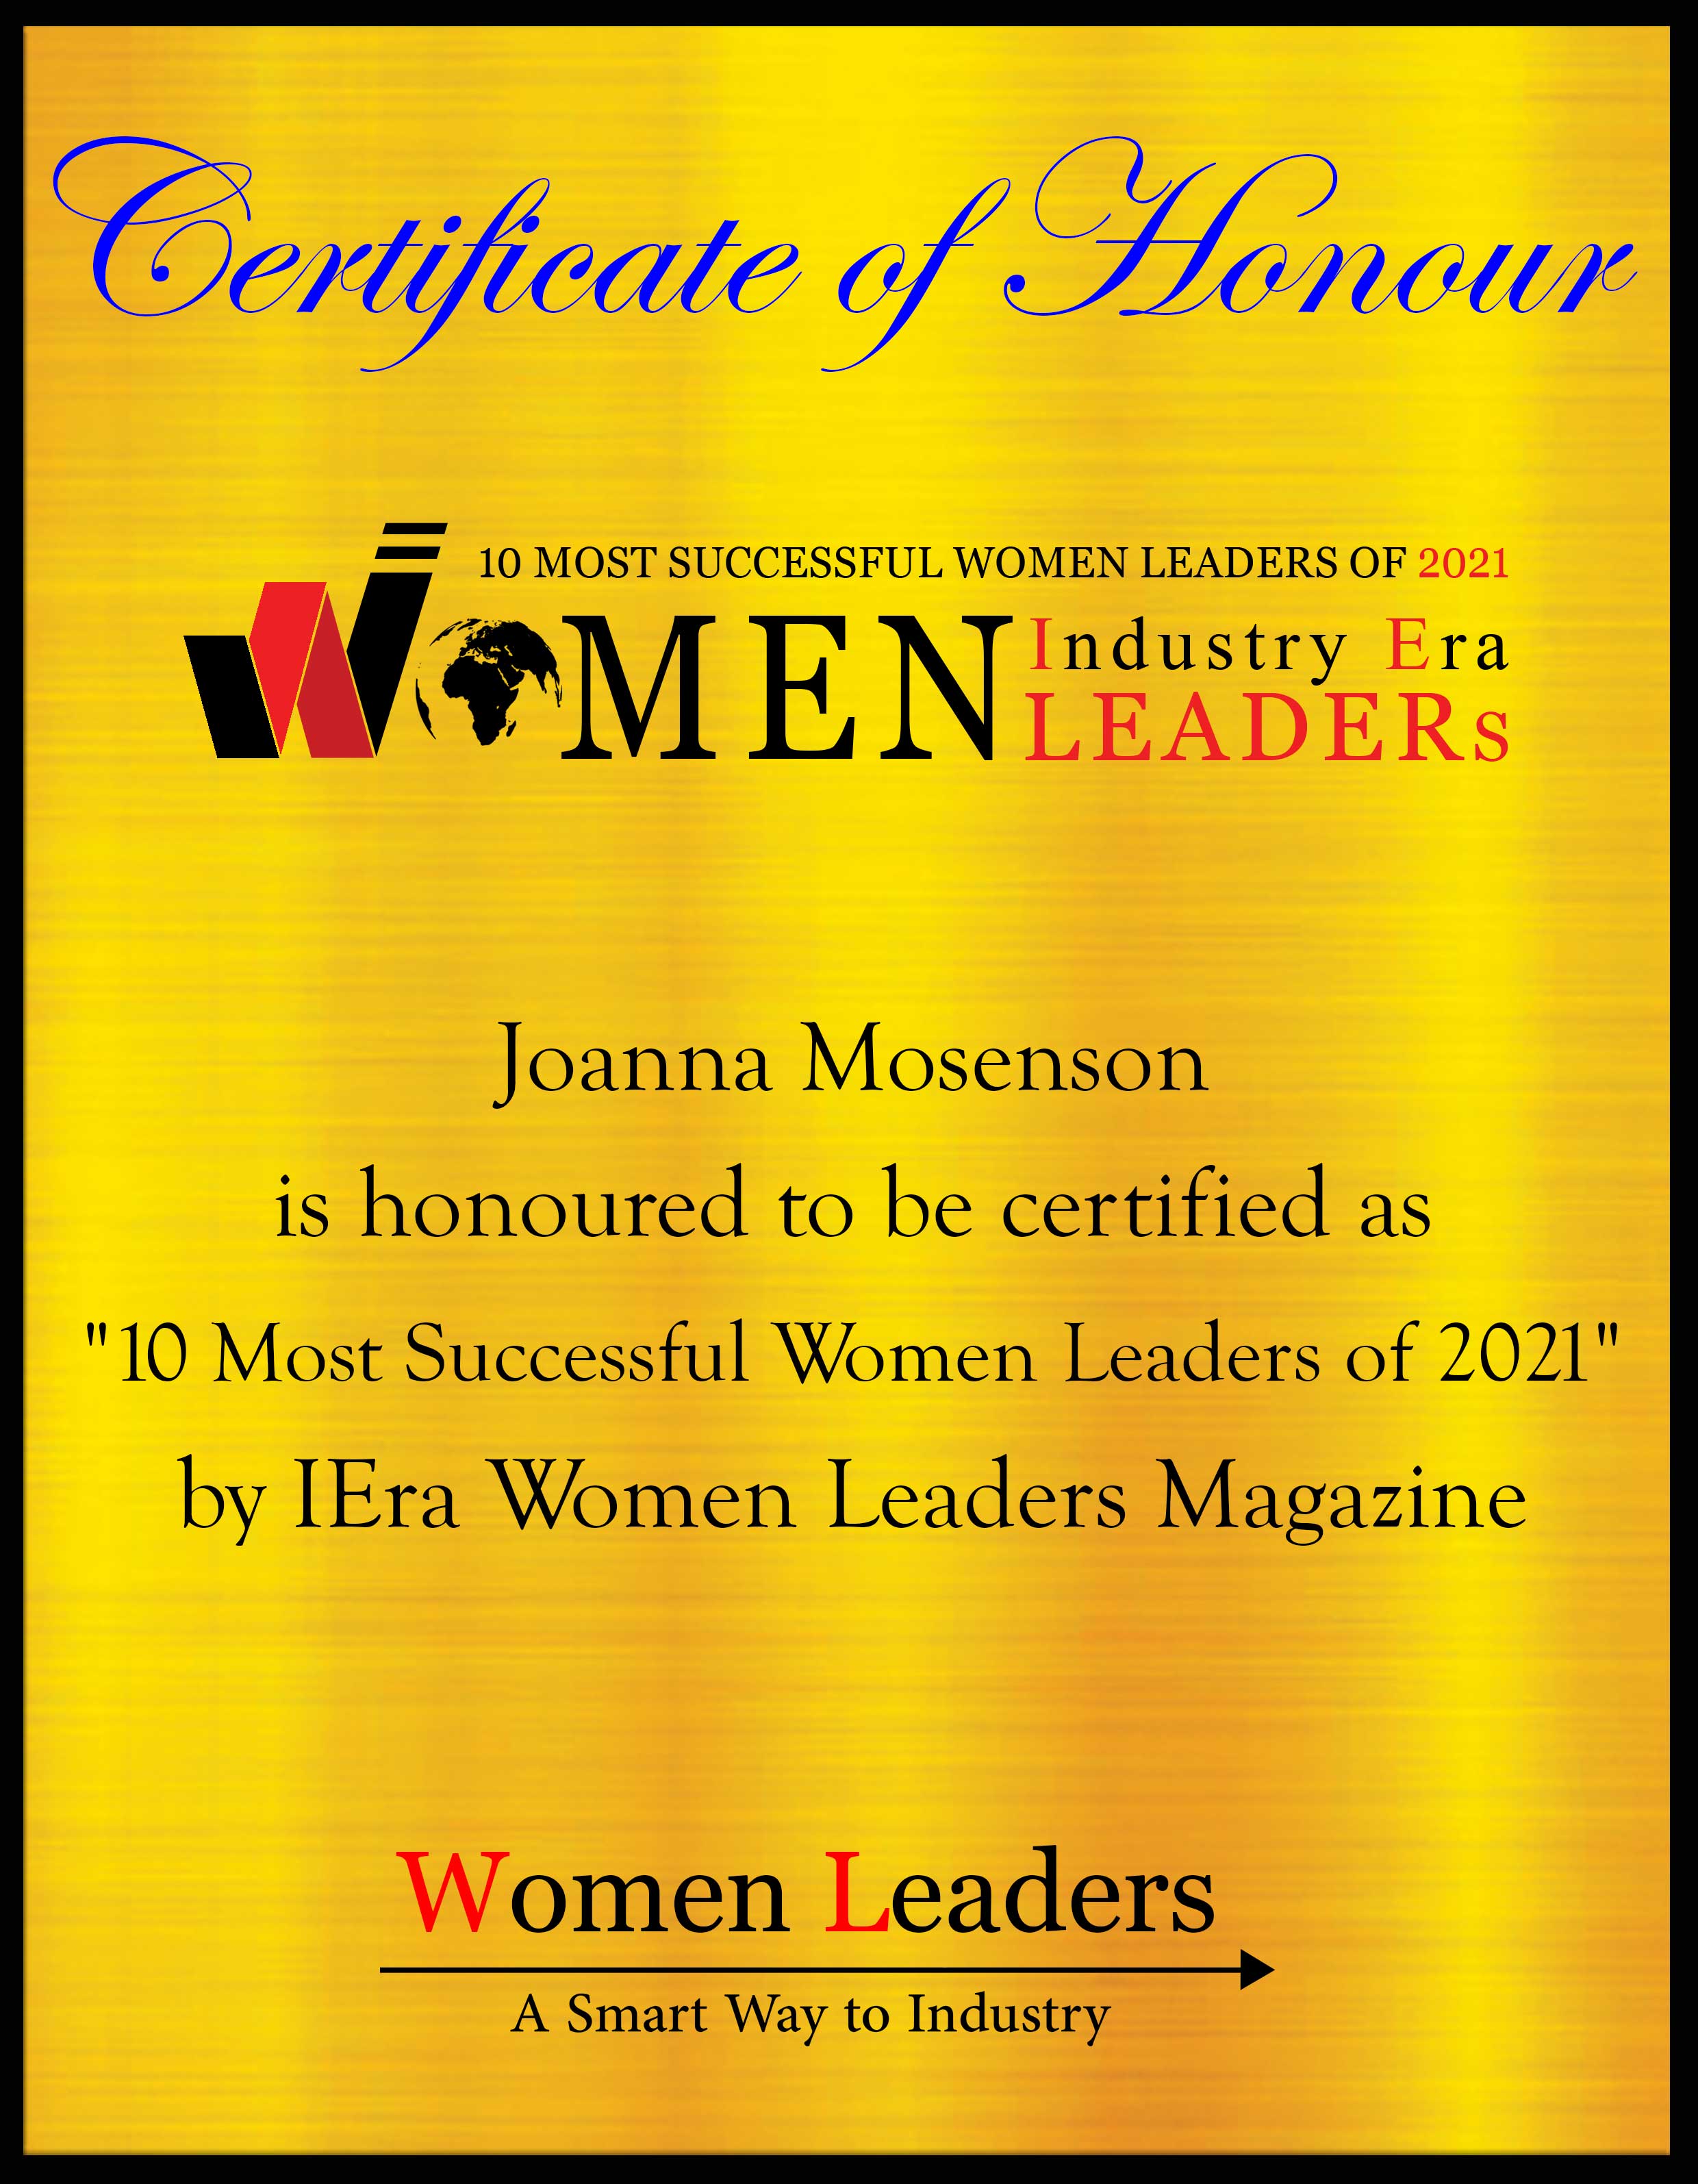 Joanna Mosenson, Director of Operations & Business Management of J&G Associates, Most Successful Women Leaders of 2021